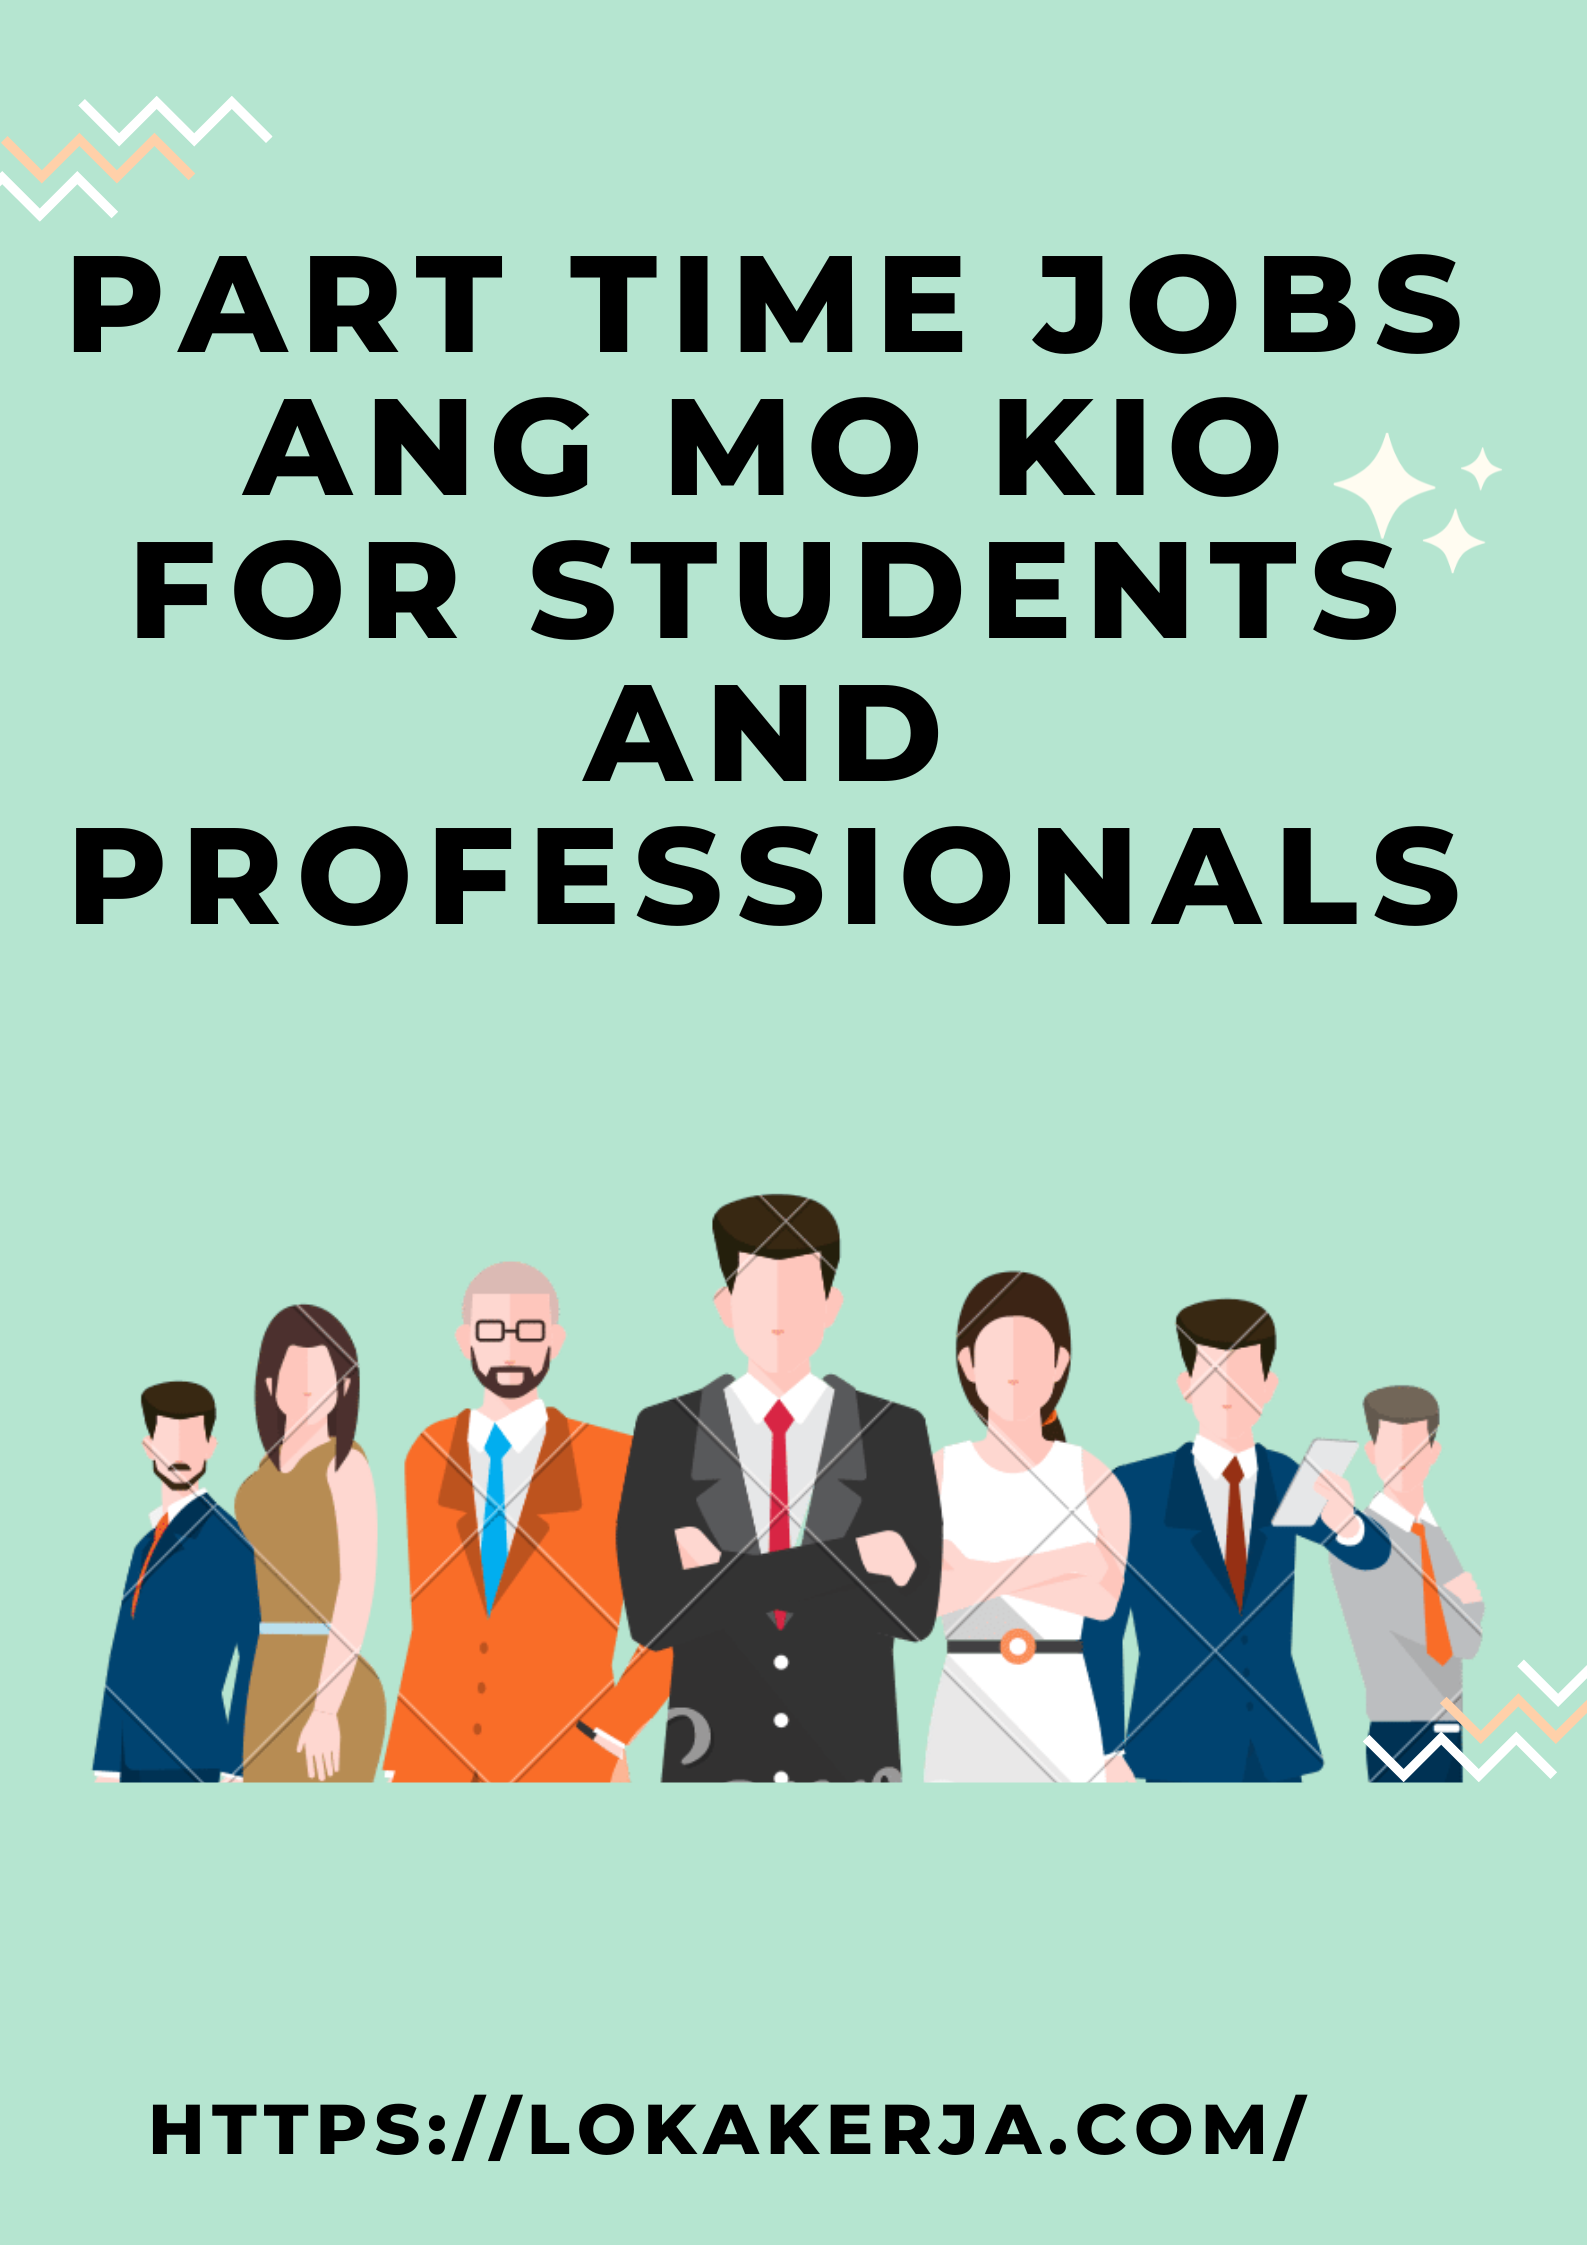 Part Time Jobs Ang Mo Kio for Students and Professionals